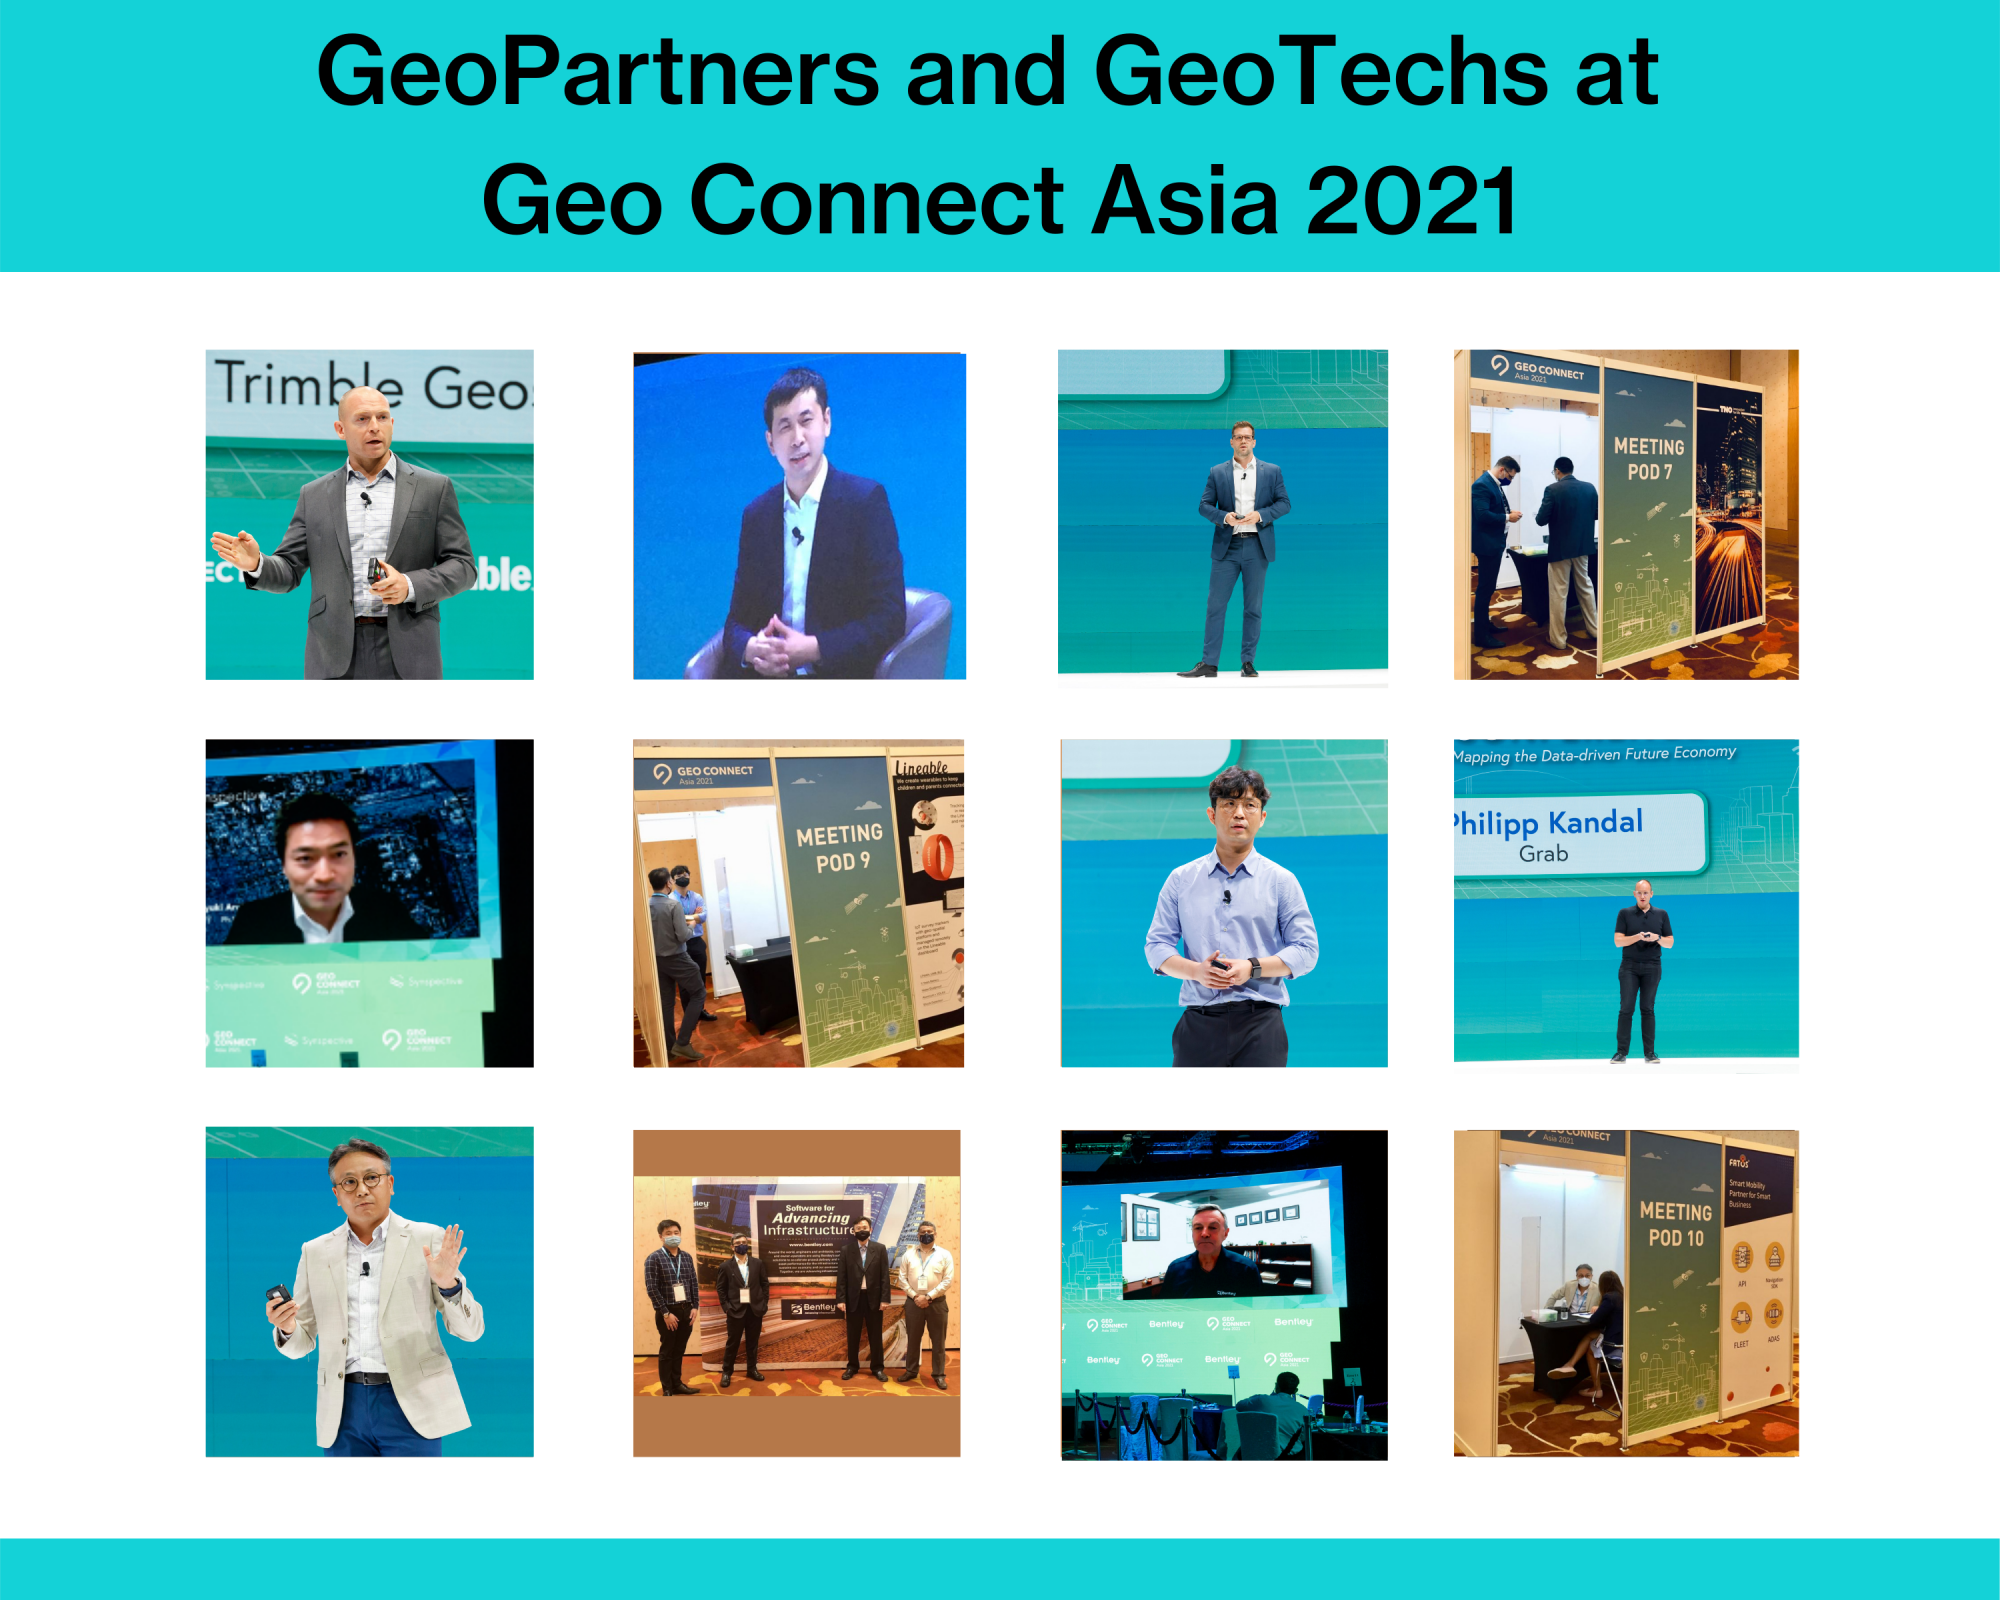 GeoPartners and GeoTechs in the limelight at Geo Connect Asia 2021